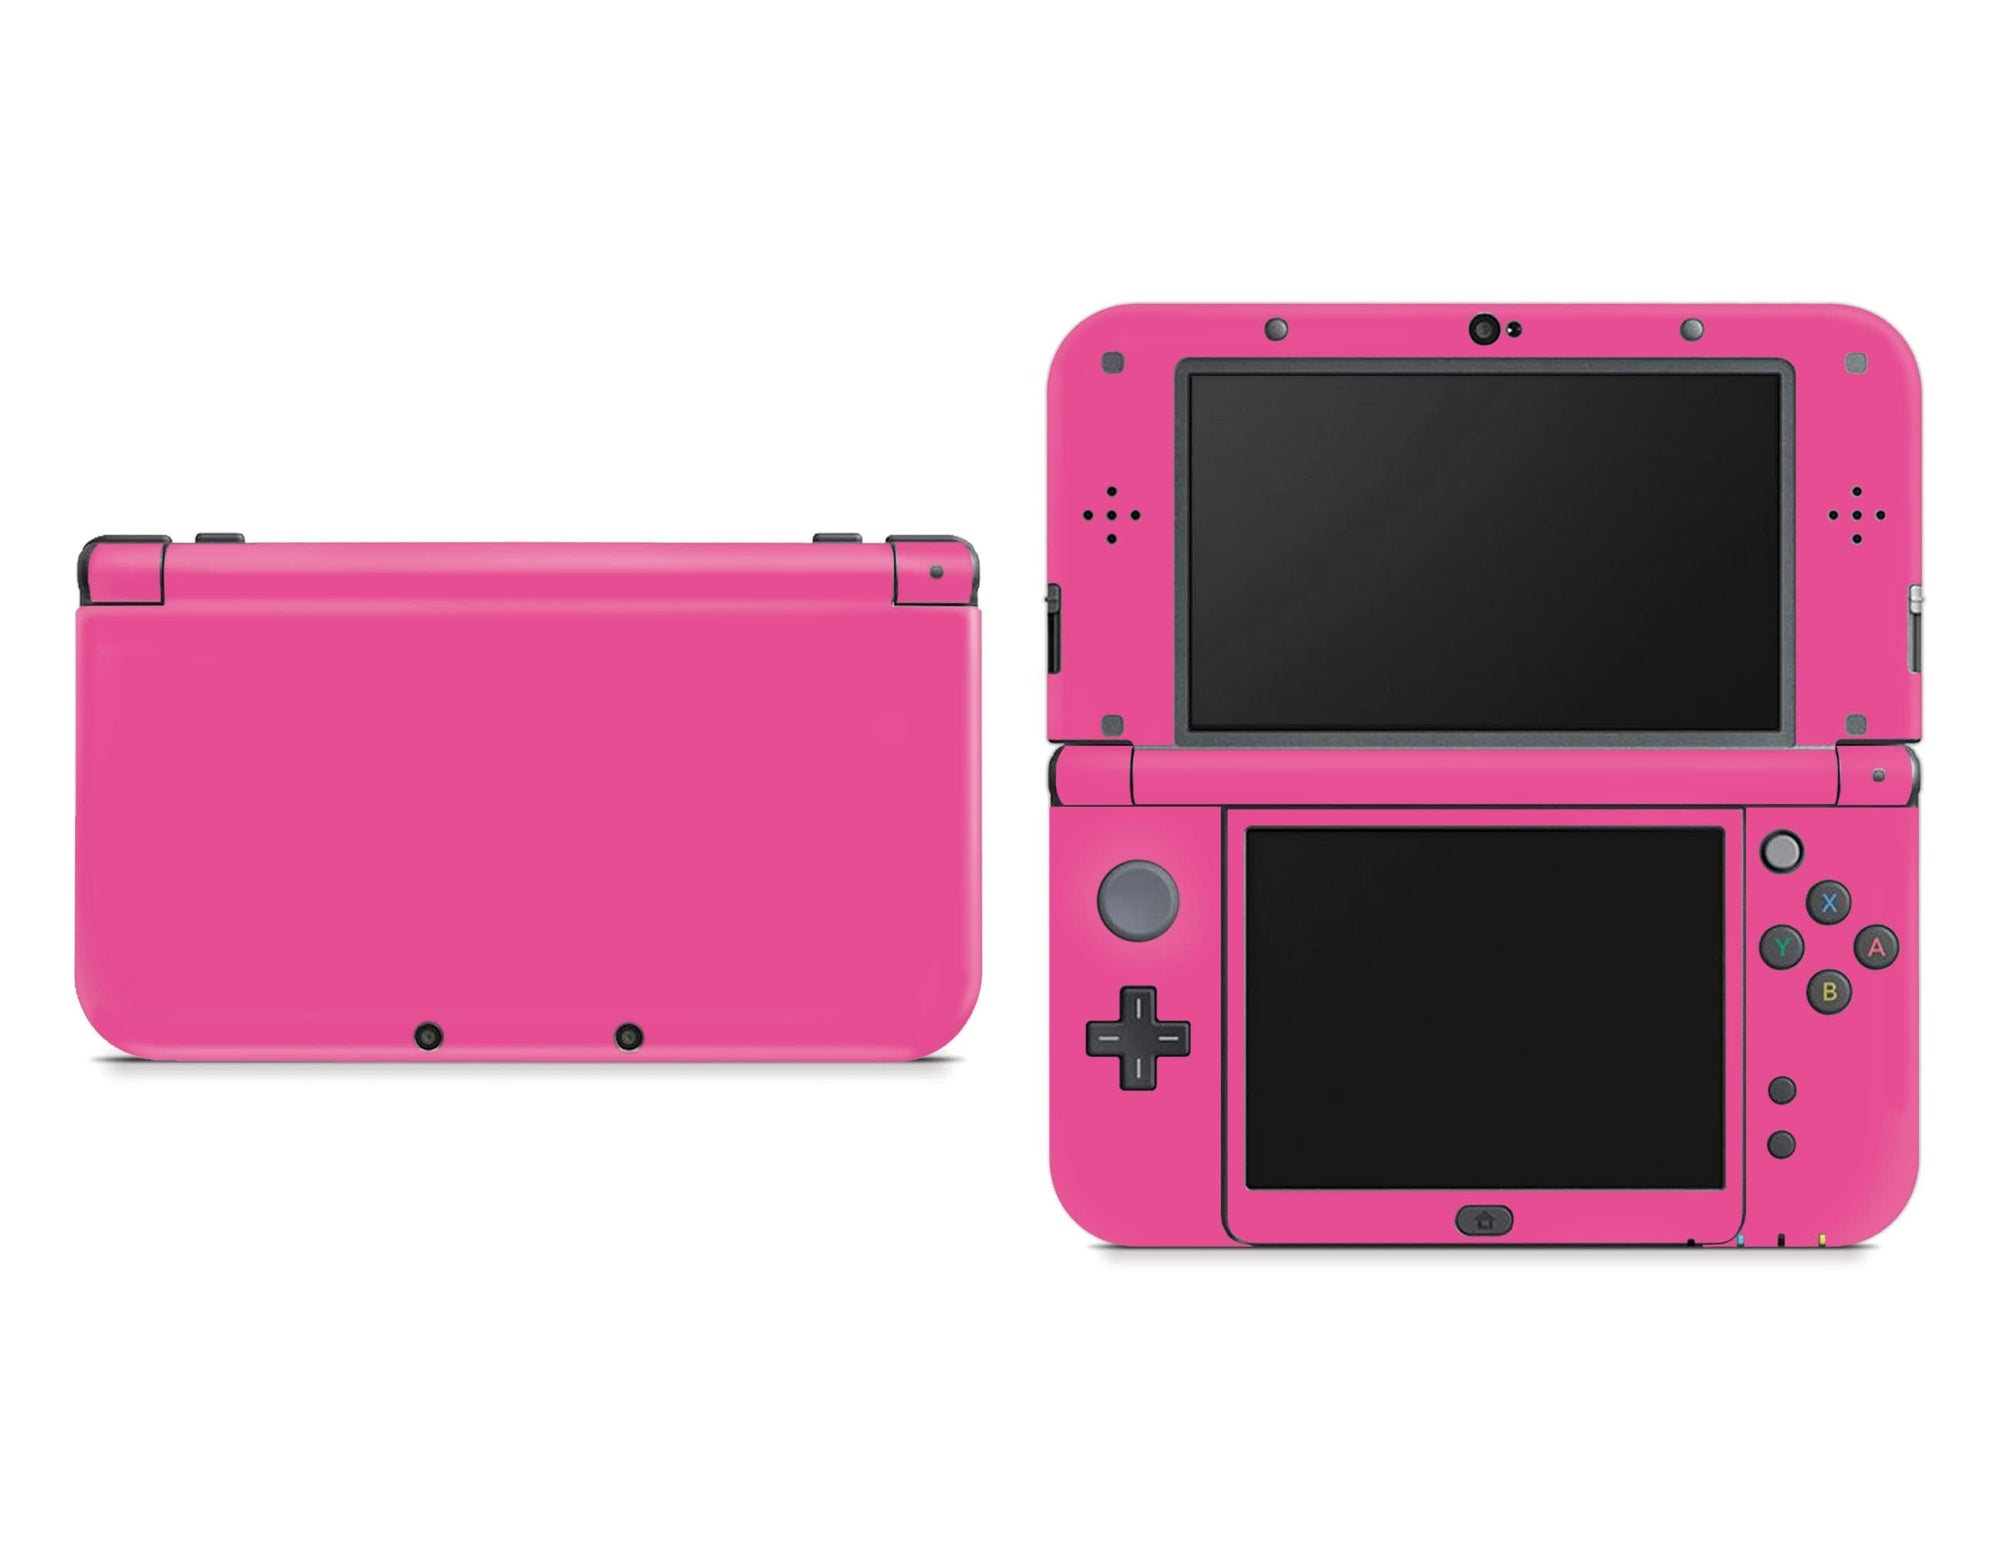 Classic Solid Color Nintendo New 3DS XL Skin | Choose Your - StickyBunny